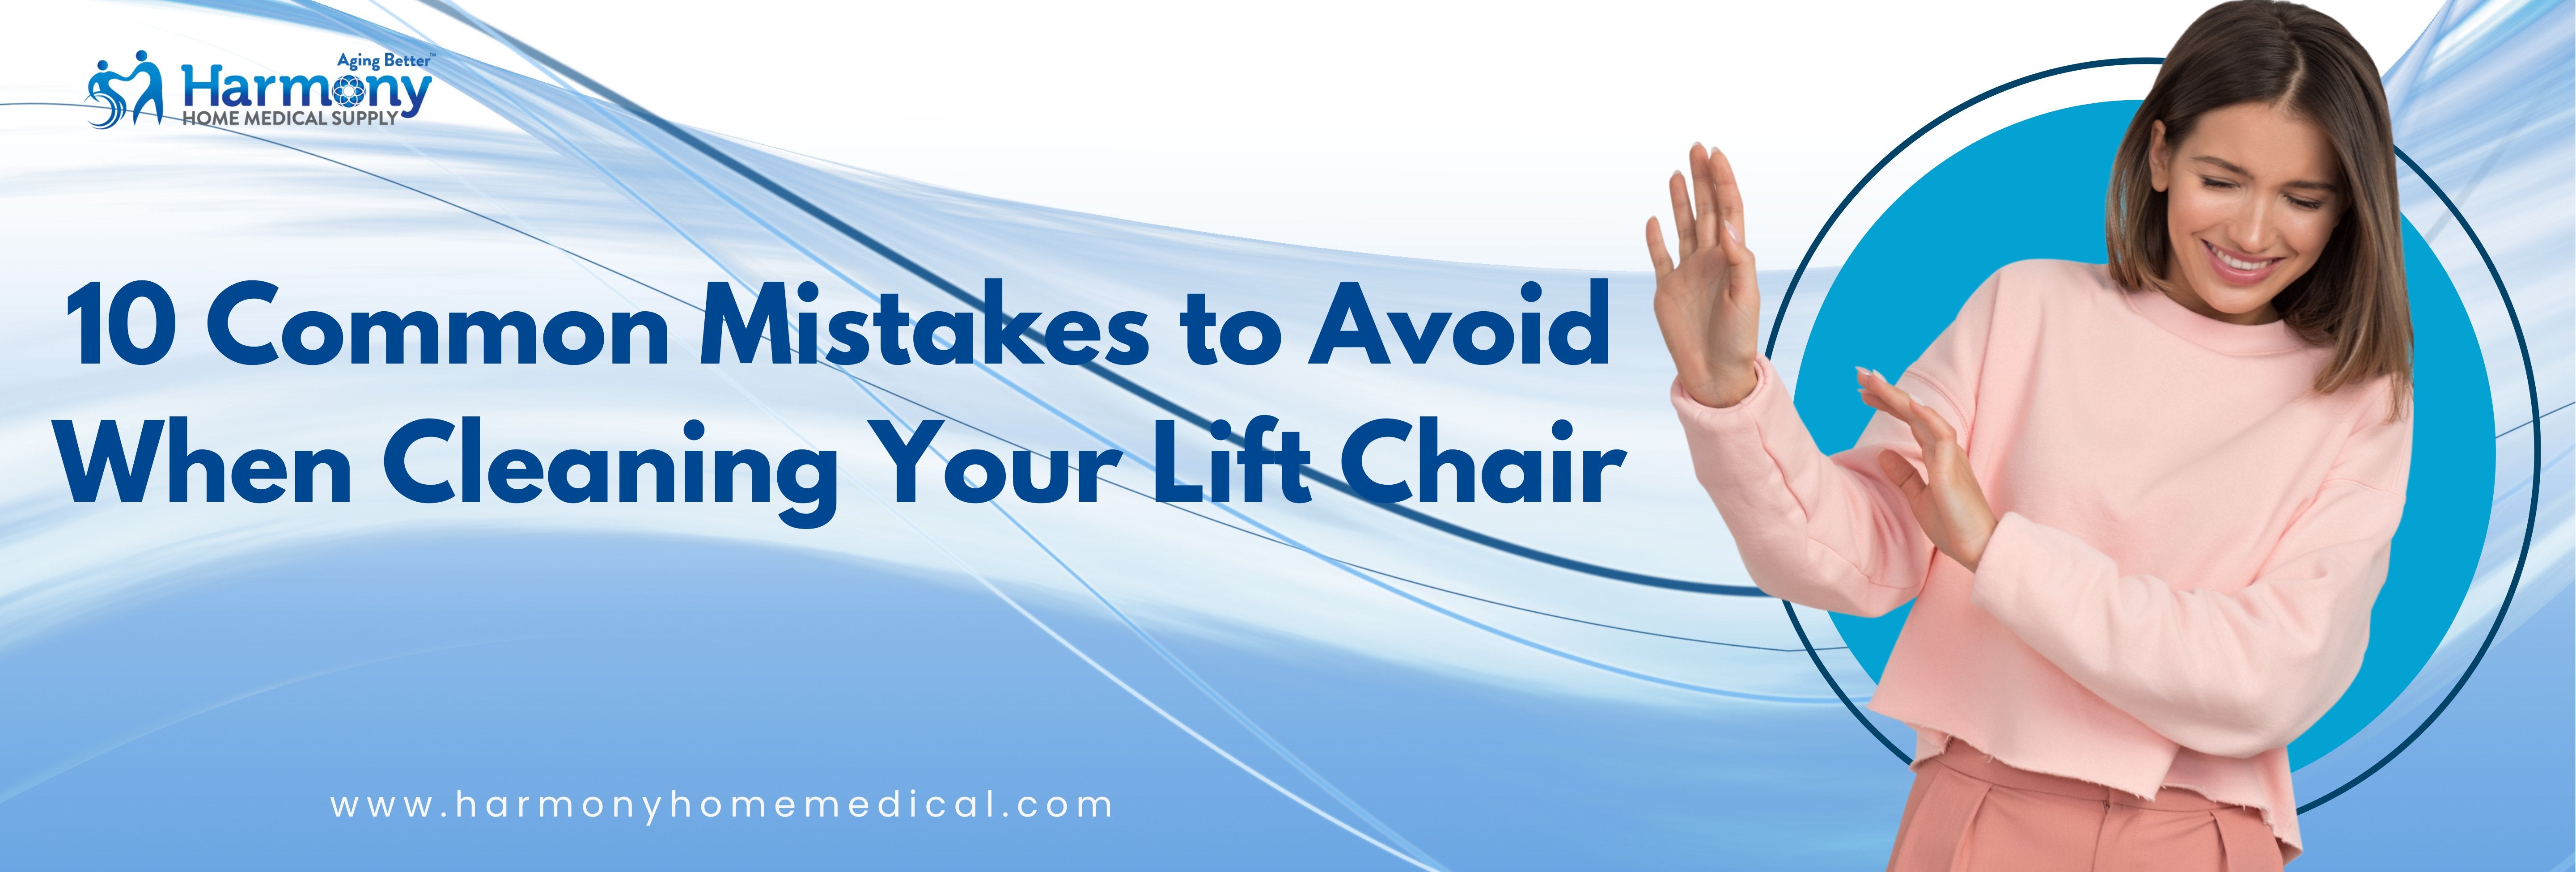 10 Common Mistakes to Avoid When Cleaning Your Lift Chair